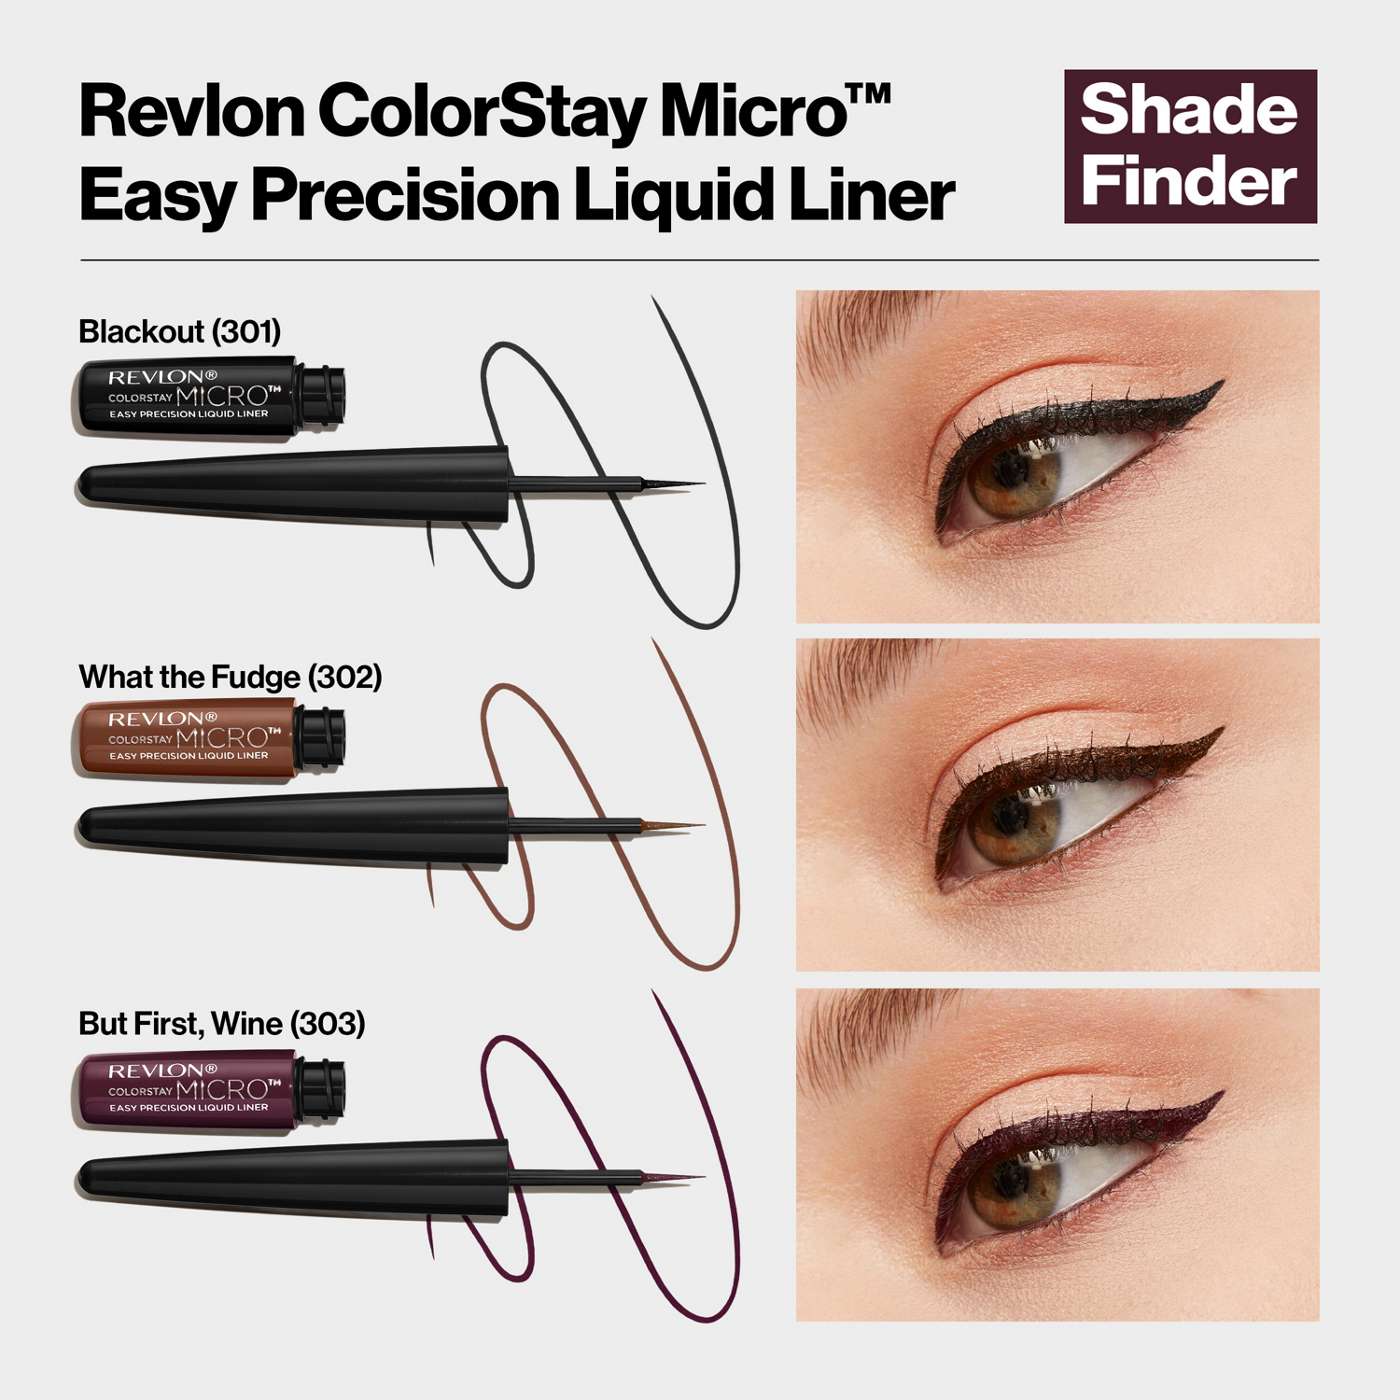 Revlon ColorStay Micro Liquid Liner - But First, Wine; image 7 of 9